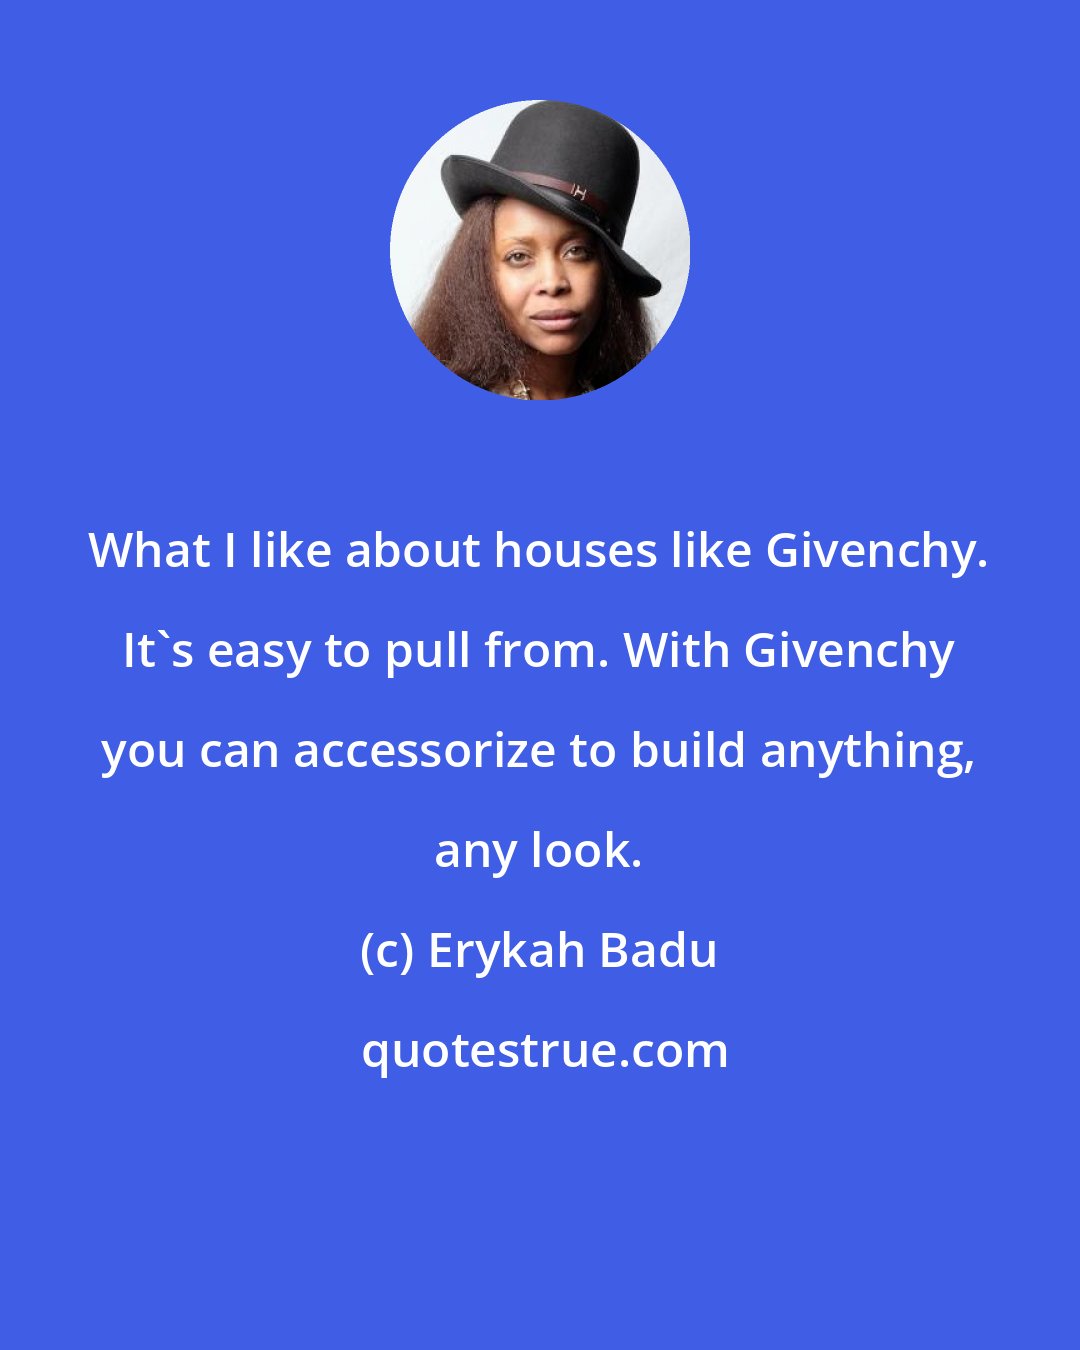 Erykah Badu: What I like about houses like Givenchy. It's easy to pull from. With Givenchy you can accessorize to build anything, any look.